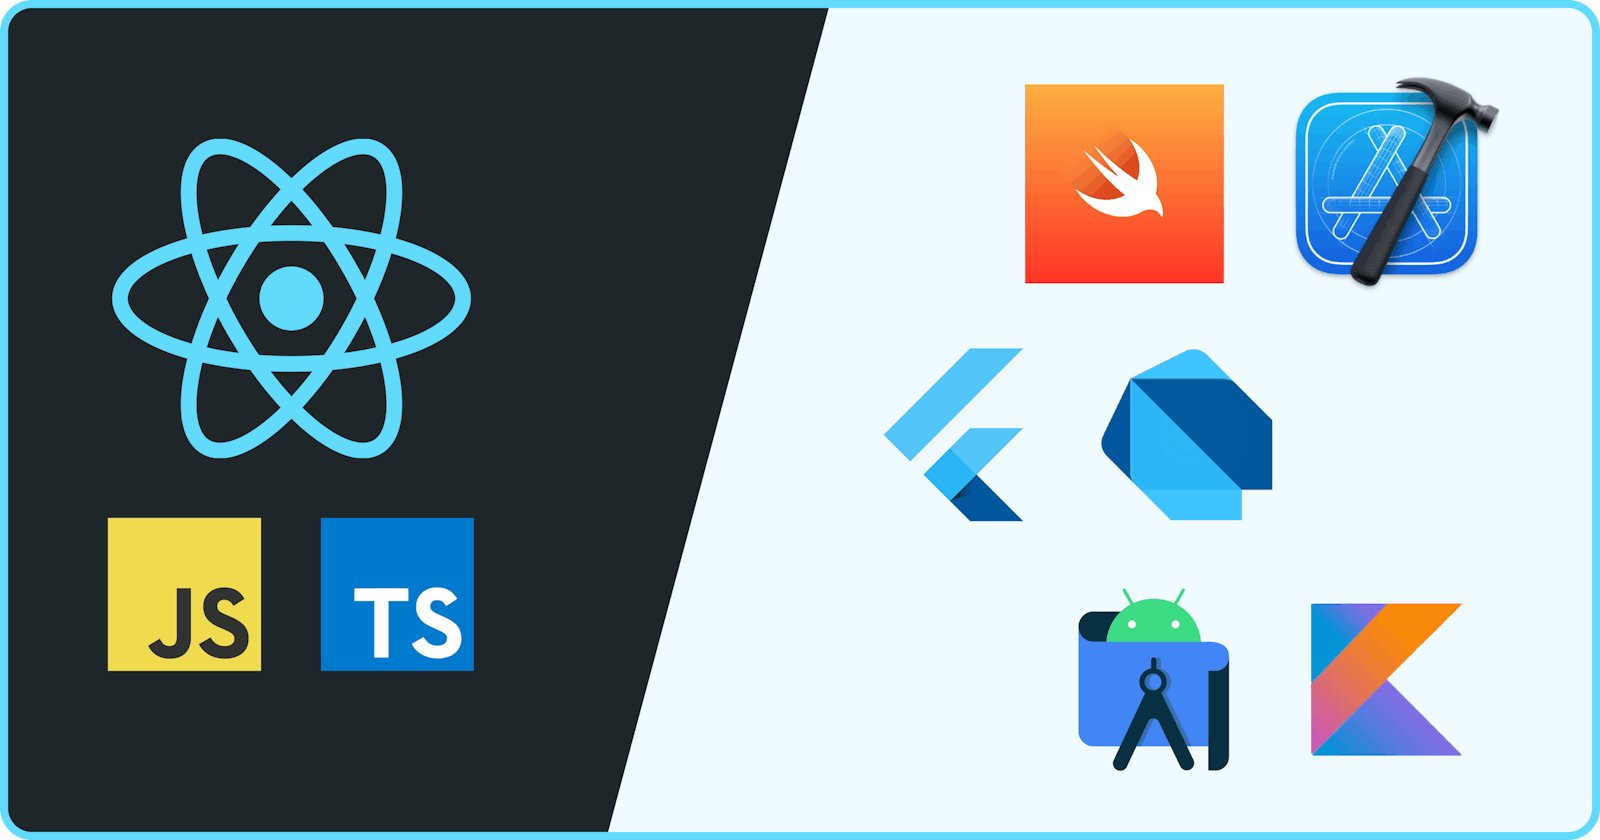 Getting Started with React-Native and why React-Native?